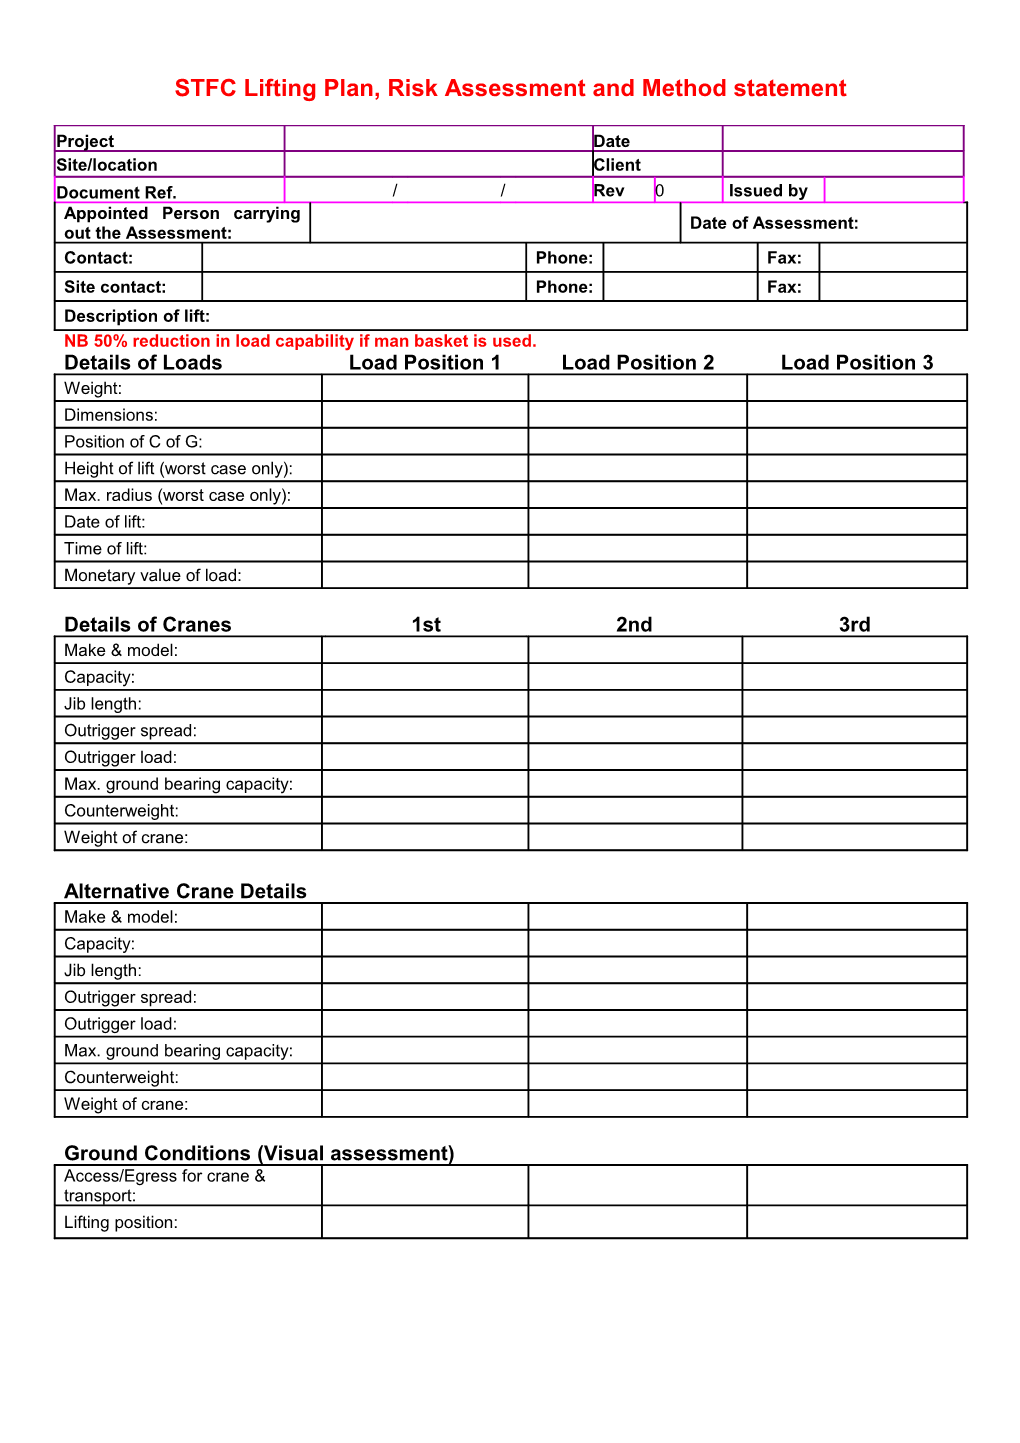 STFC Lifting Plan, Risk Assessment and Method Statement